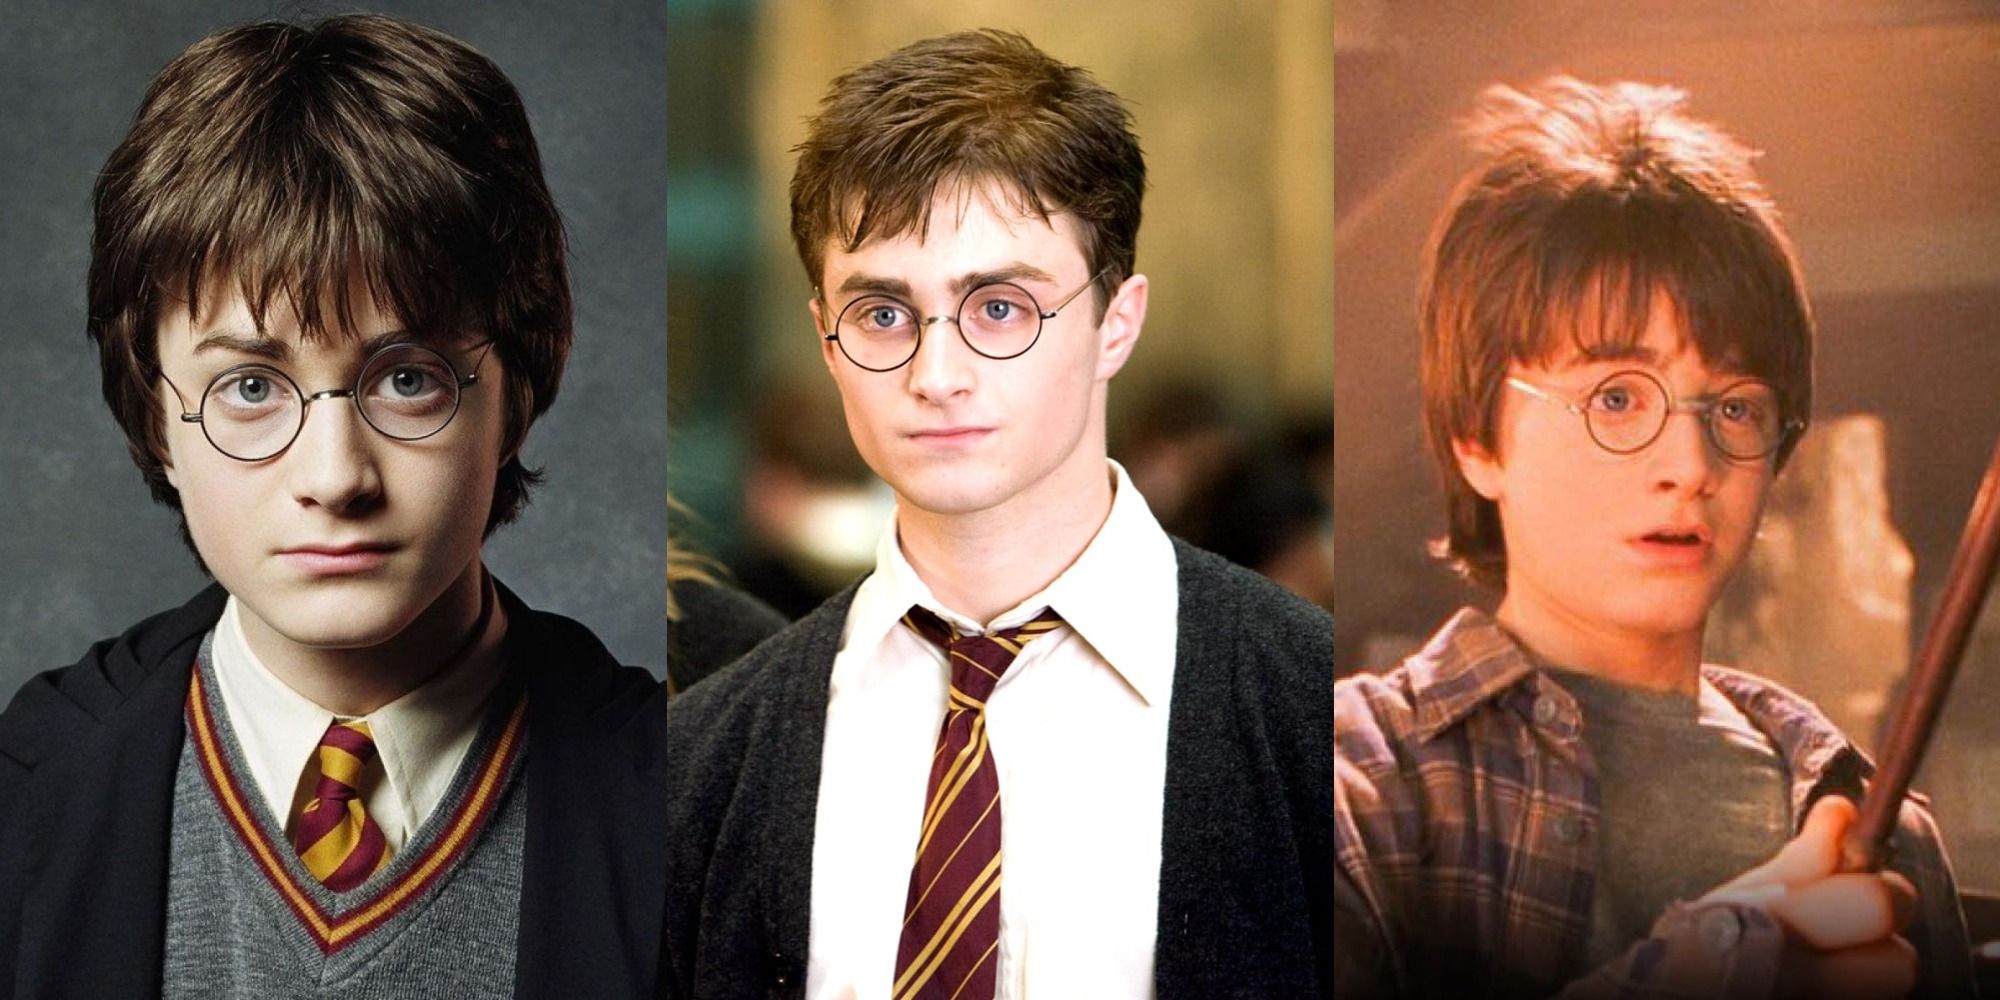 Three side by side images of Harry Potter